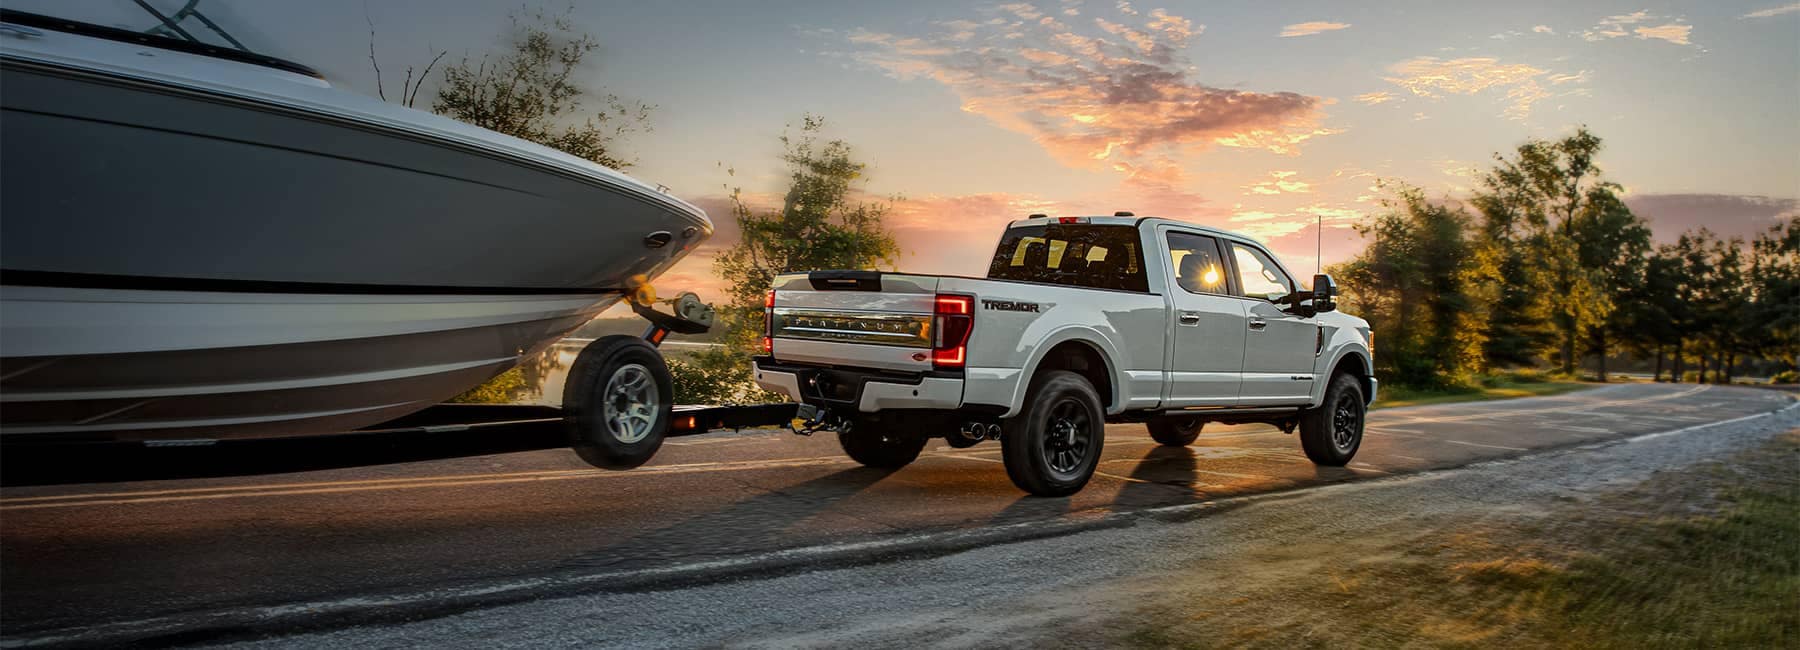 2022 Ford Super Duty pulling a boat (1)